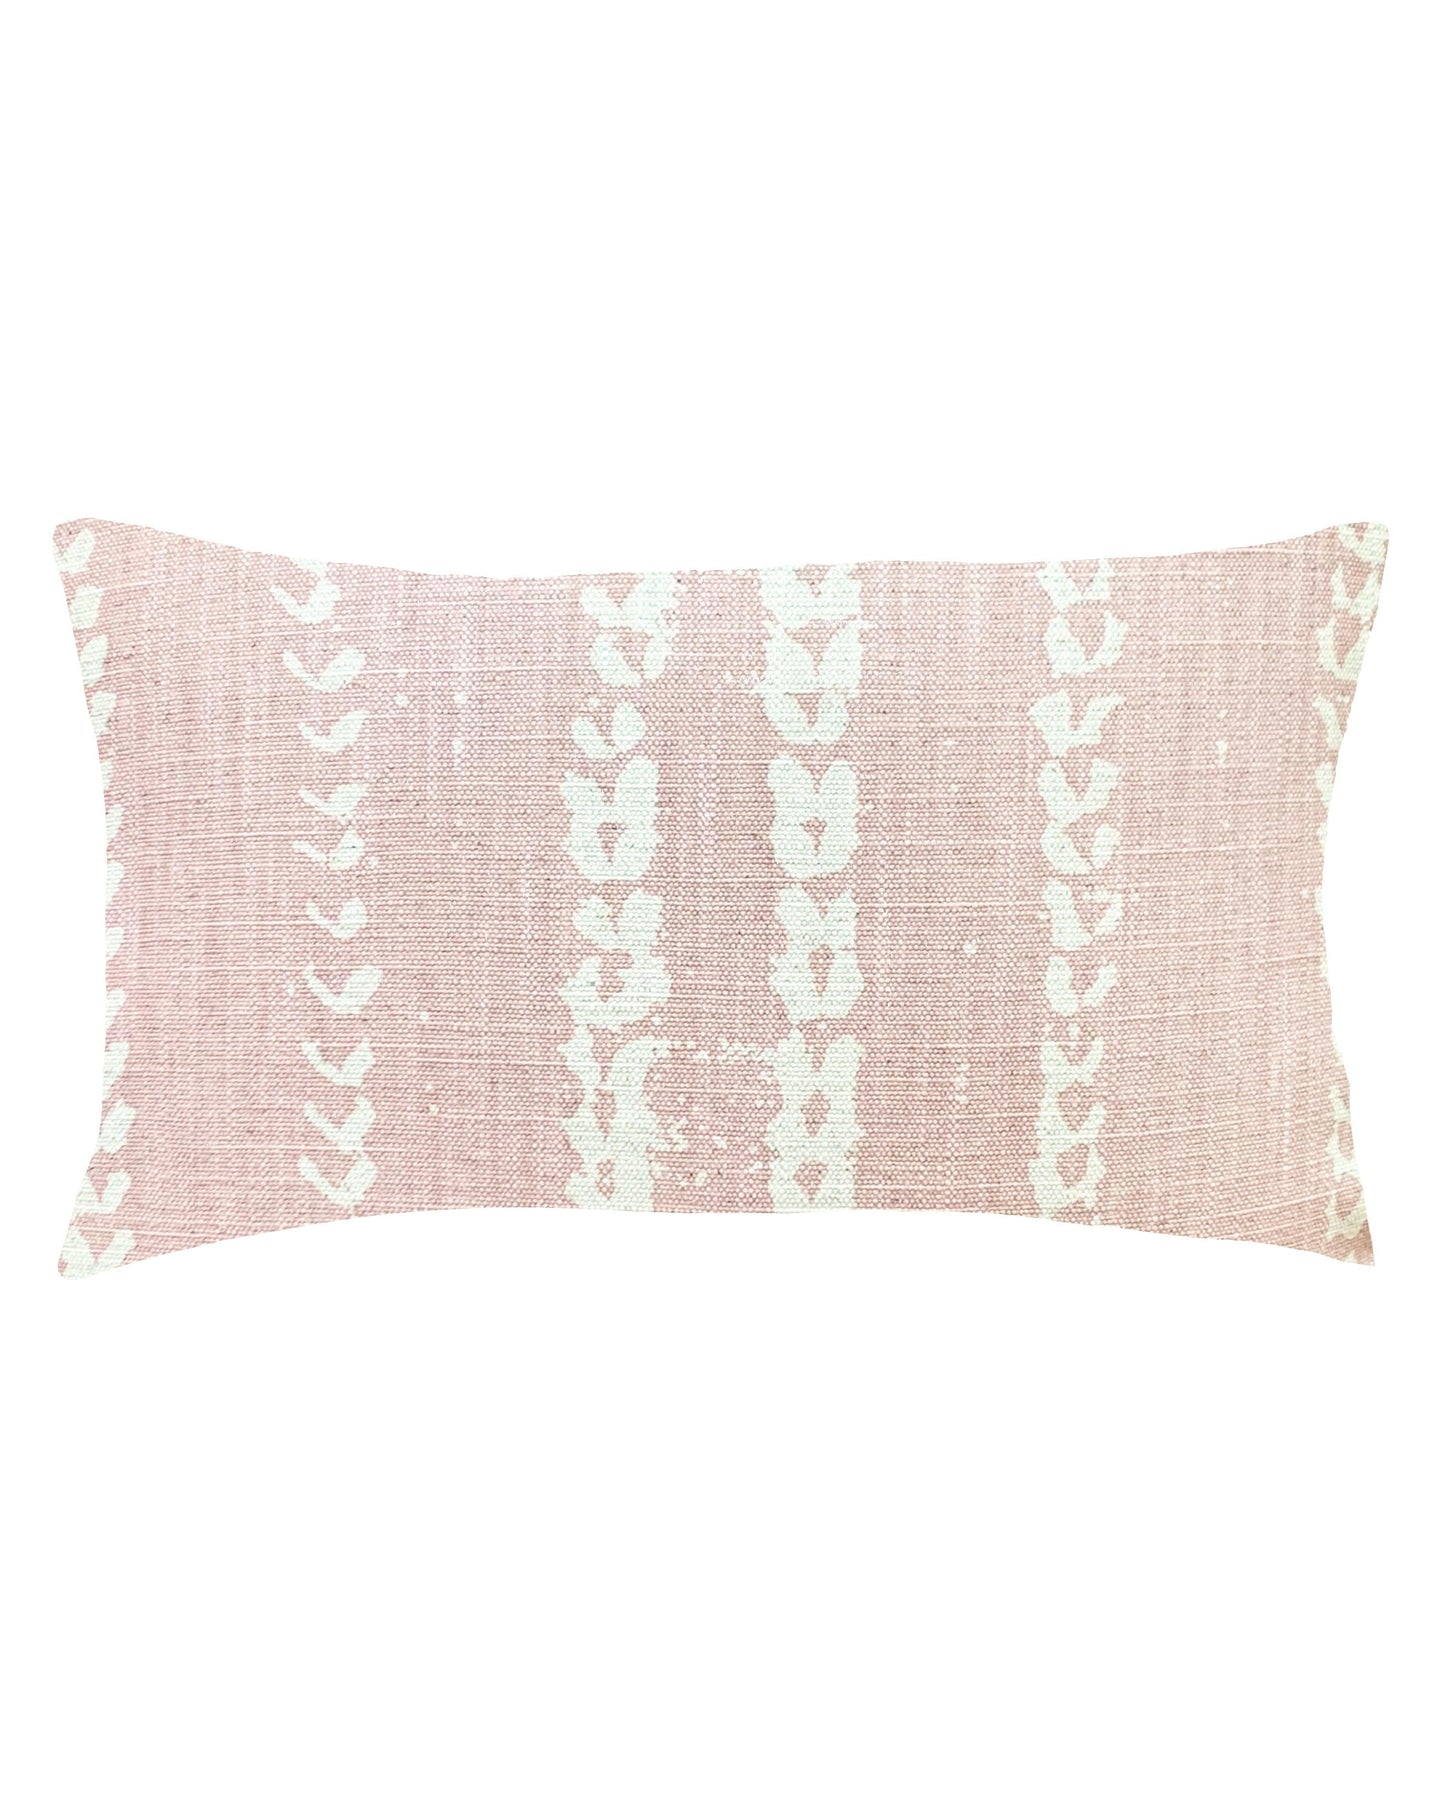 PILLOWPIA vines lumbar pillow in blush cover only